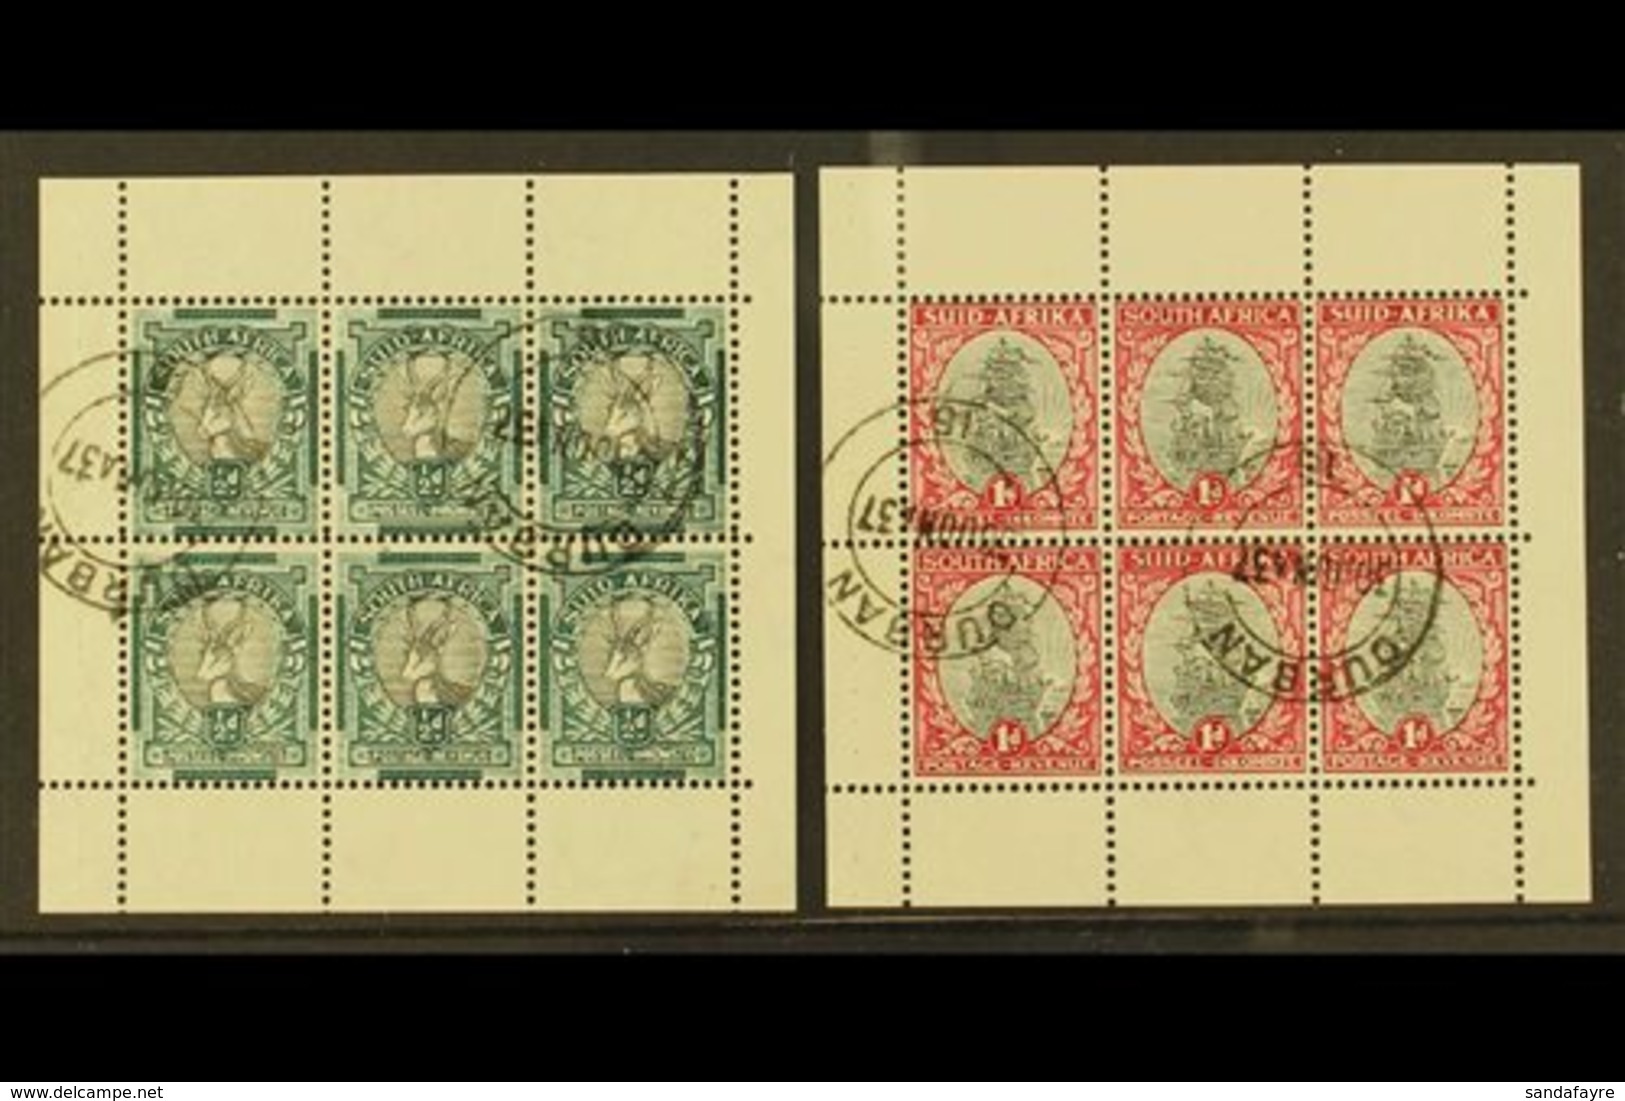 BOOKLET PANES 1937 ½d & 1d  Blank Margins COMPLETE PANES OF SIX, SG 75ca, 56f, Very Fine Used And Scarce Thus (2 Panes). - Unclassified